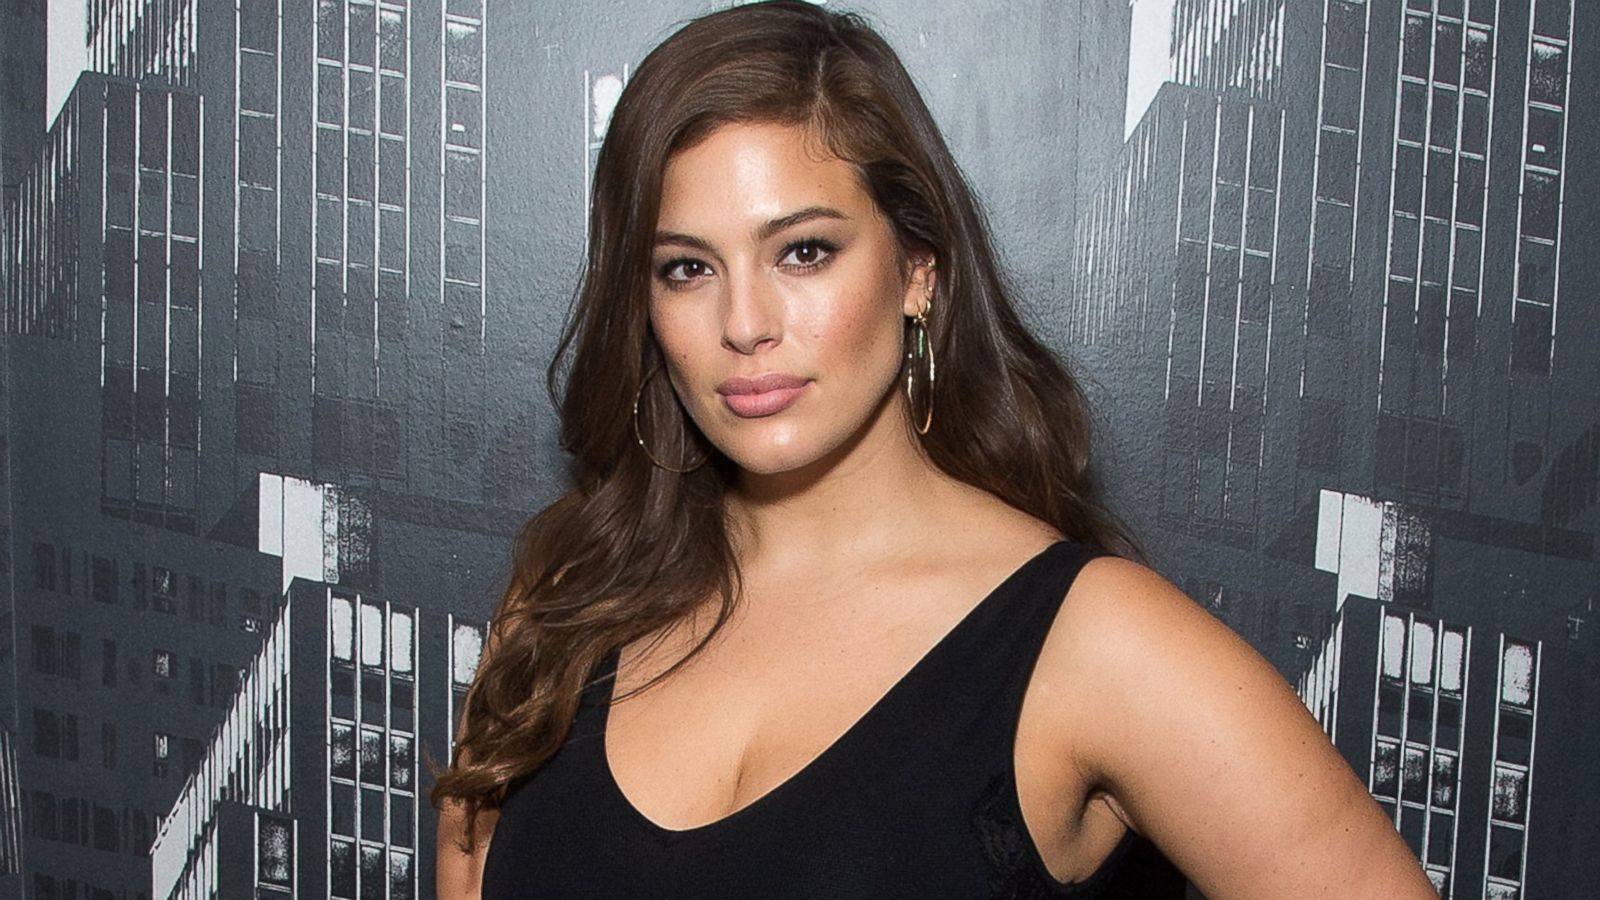 Ashley Graham's Weight Loss Surgery Experience